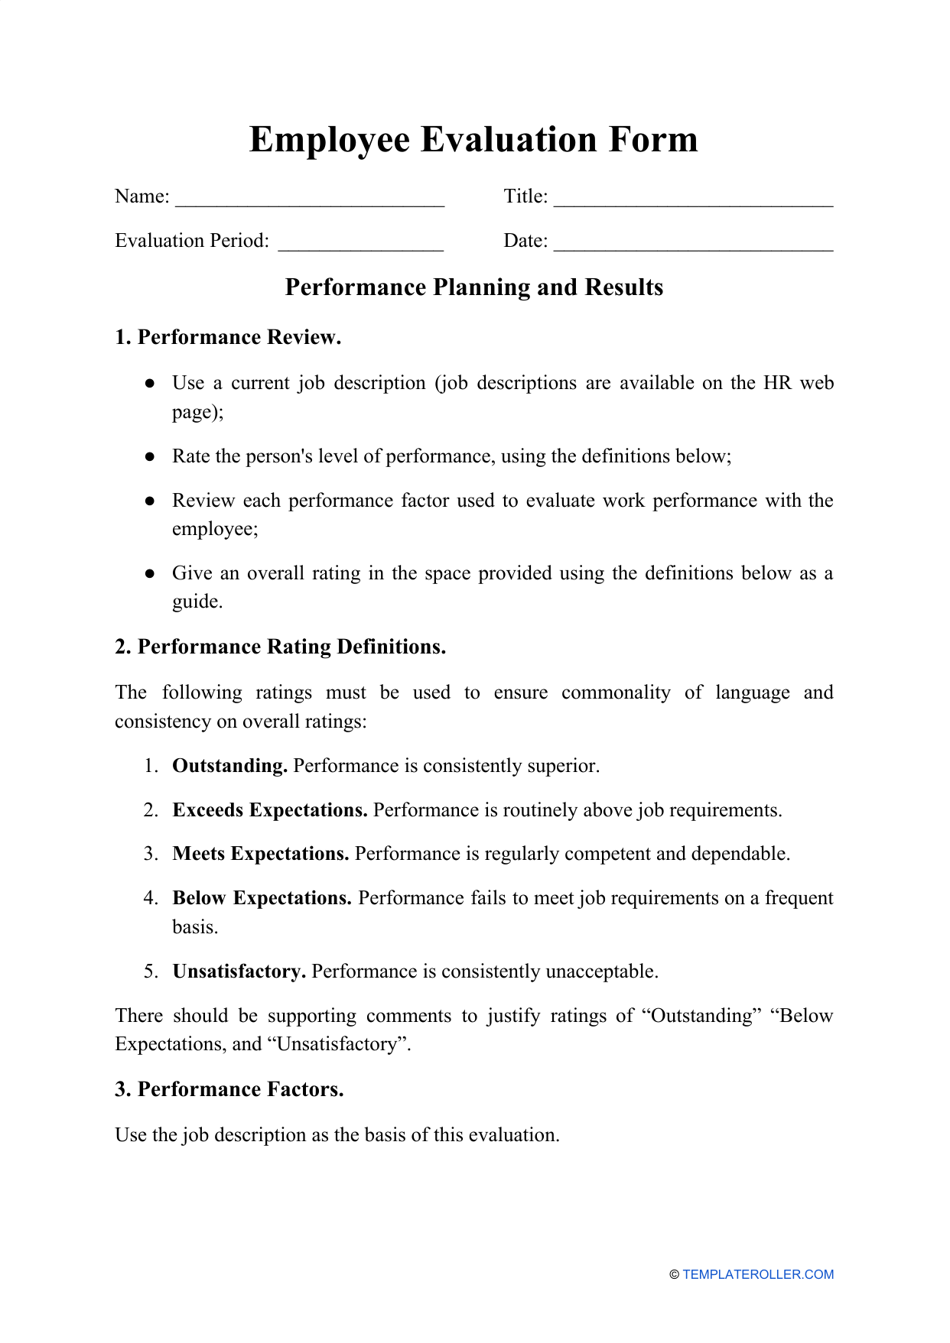 Employee Evaluation Form, Page 1